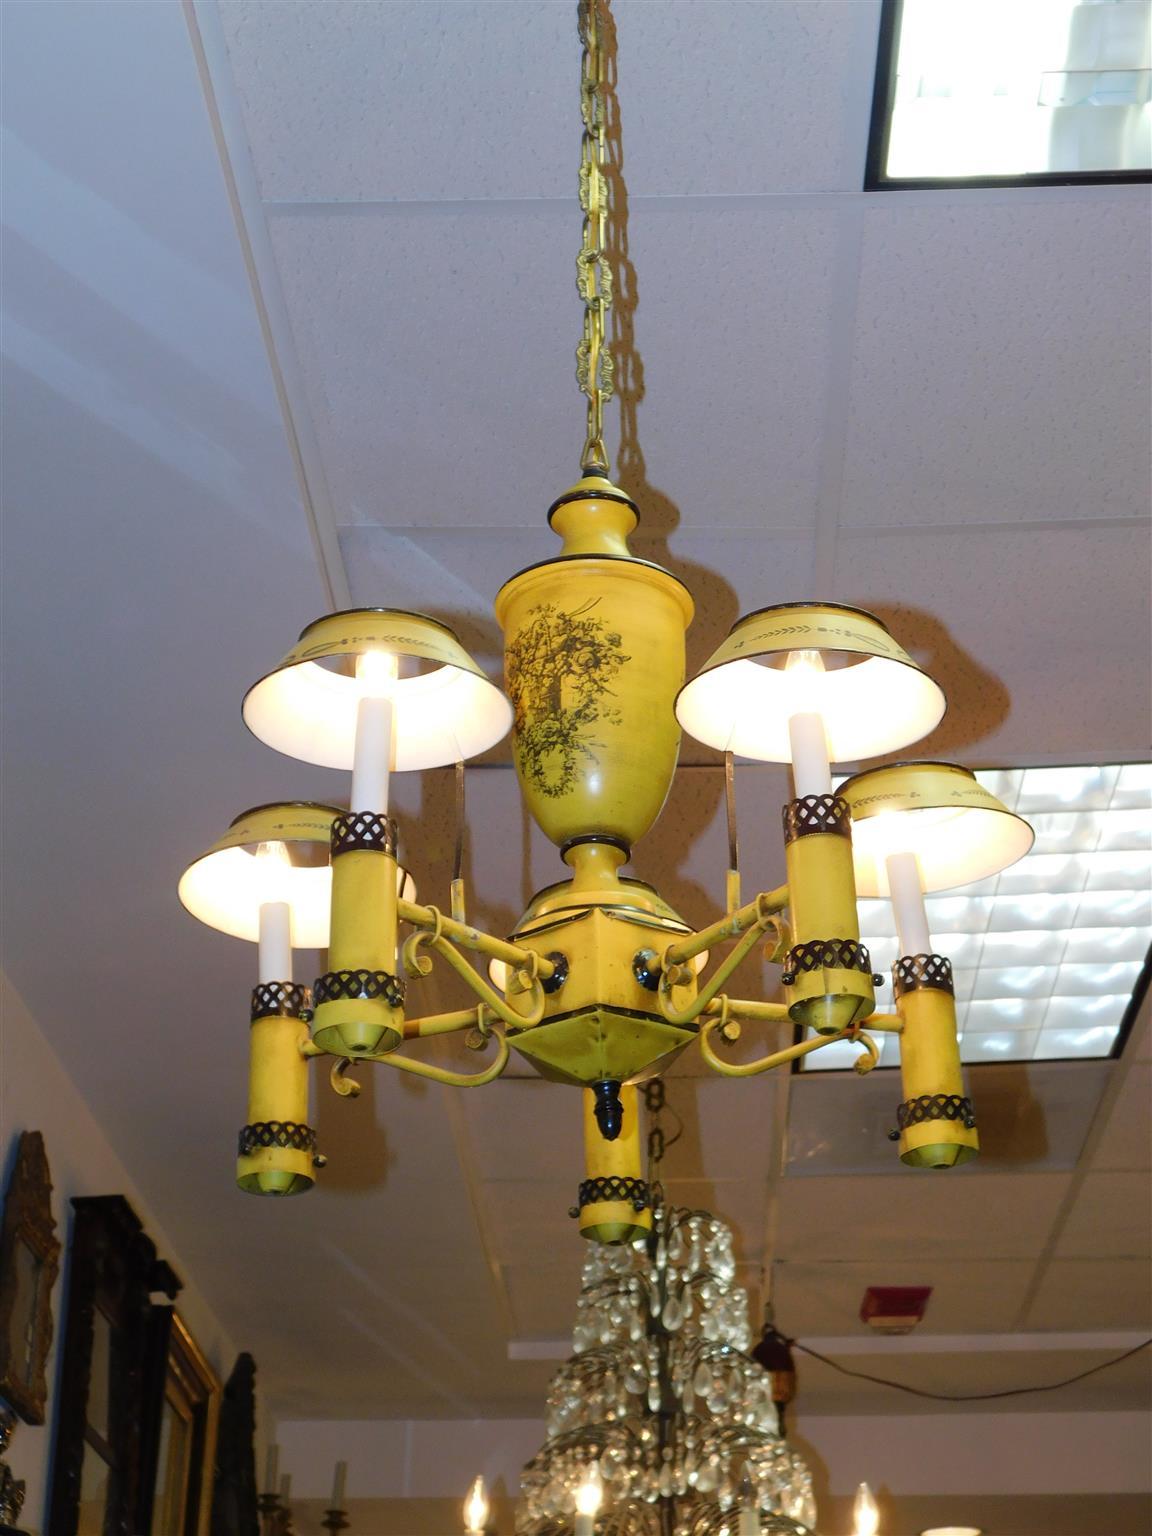 English tole yellow and black paint decorated five light chandelier with central urn foliage fruit basket, acorn finial, and five scrolled arms with the original slot mounted shades. Originally candle powered and has been electrified. Mid 19th